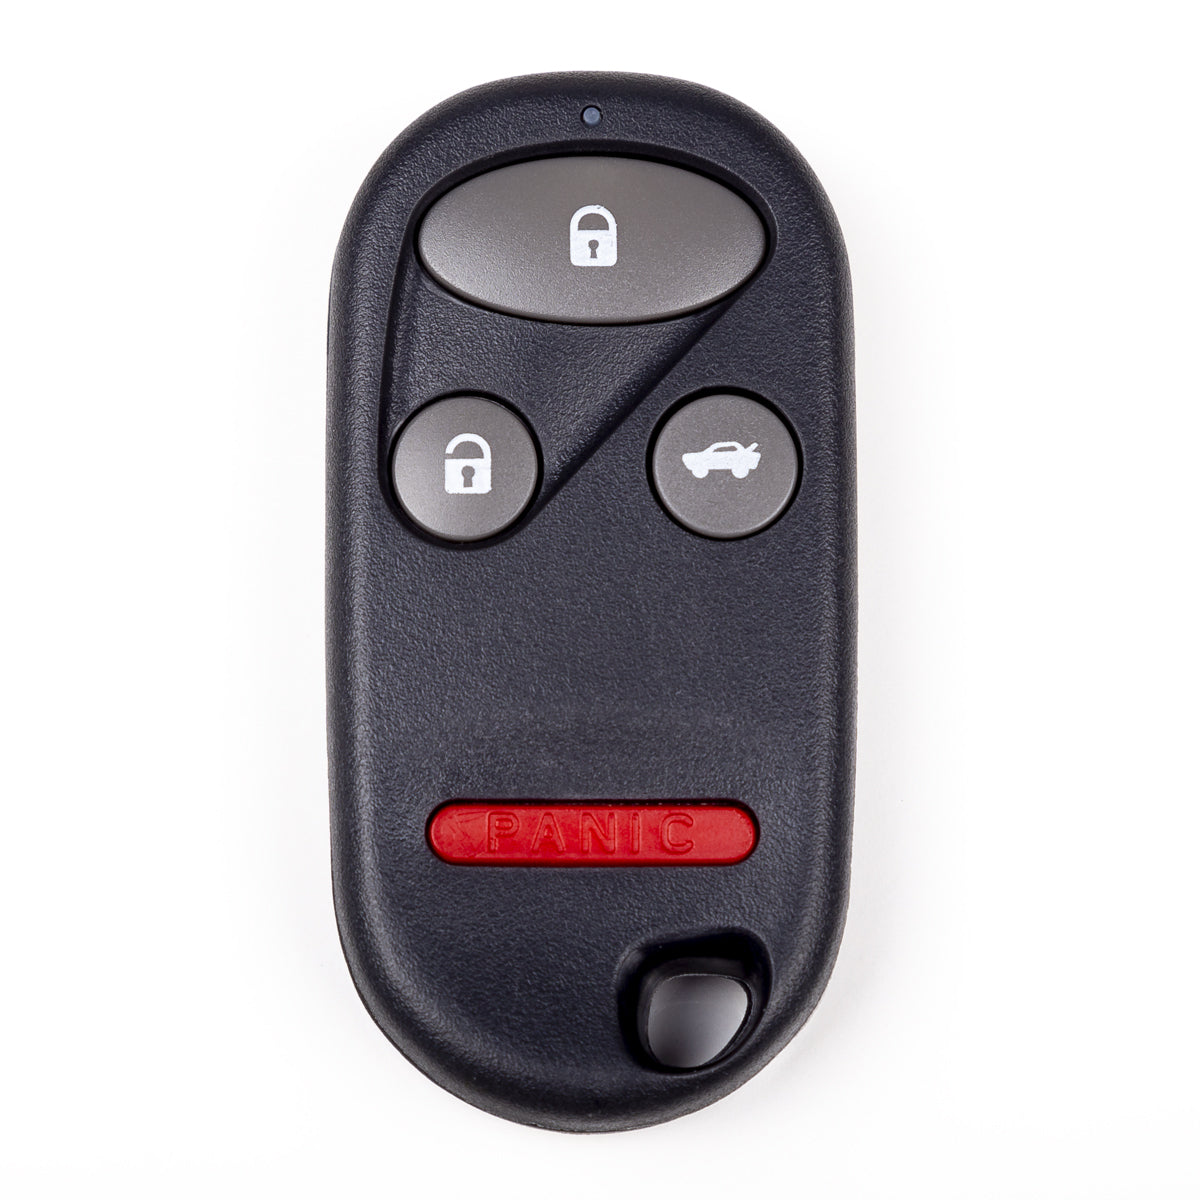 Keyless Remote Fob for Acura TSX TL 2004 2005 2006 2007 2008 4B FCC# OUCG8D-387H-A